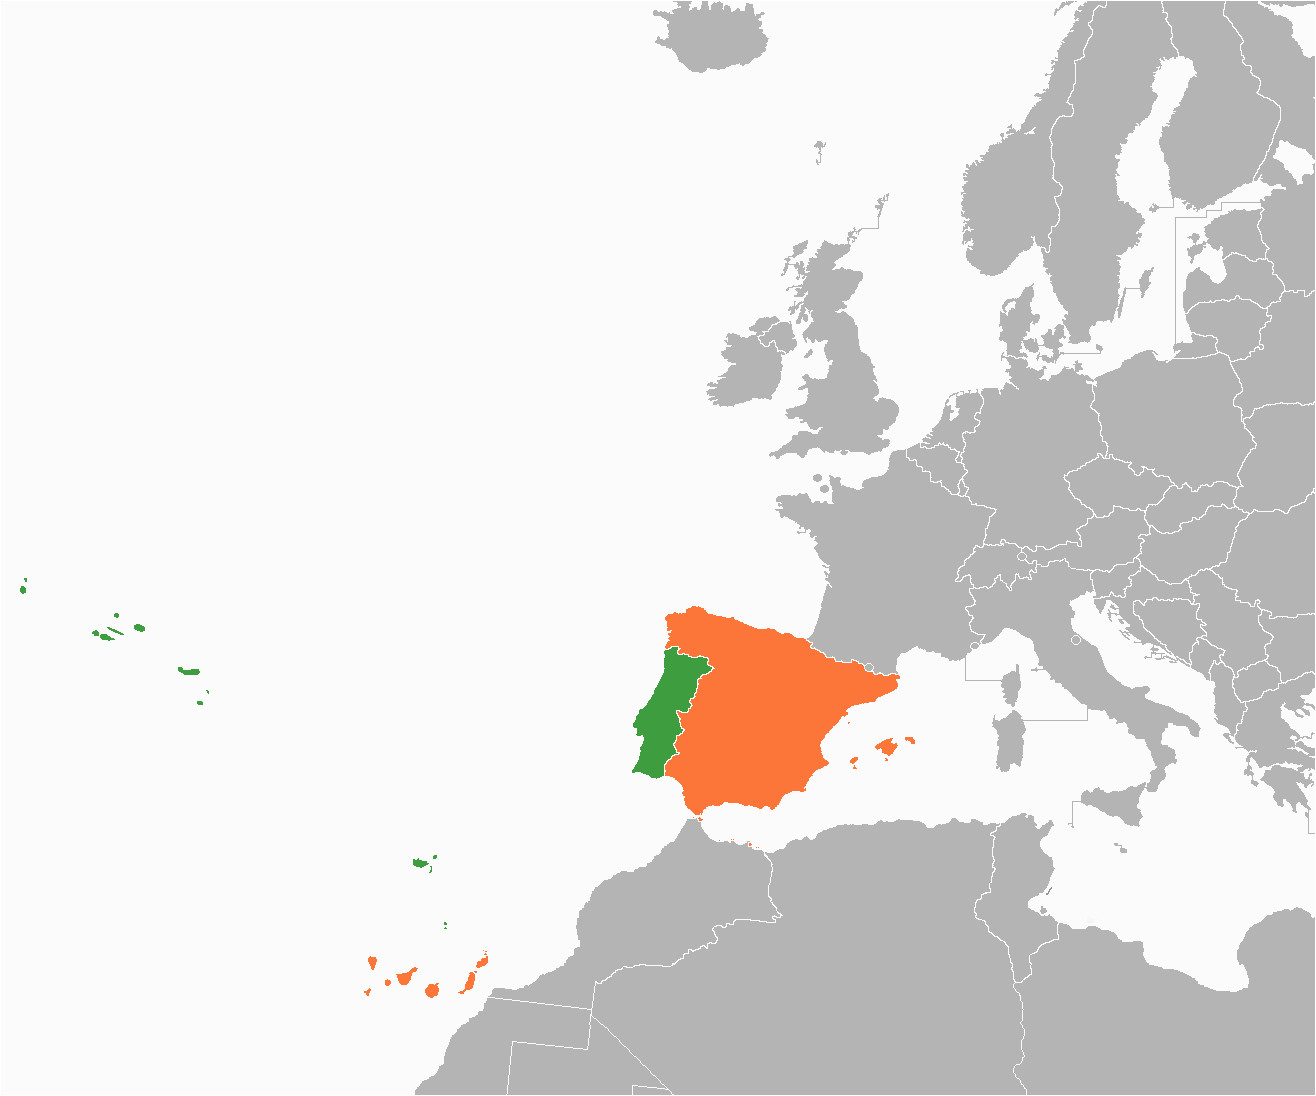 portugal spain relations wikipedia